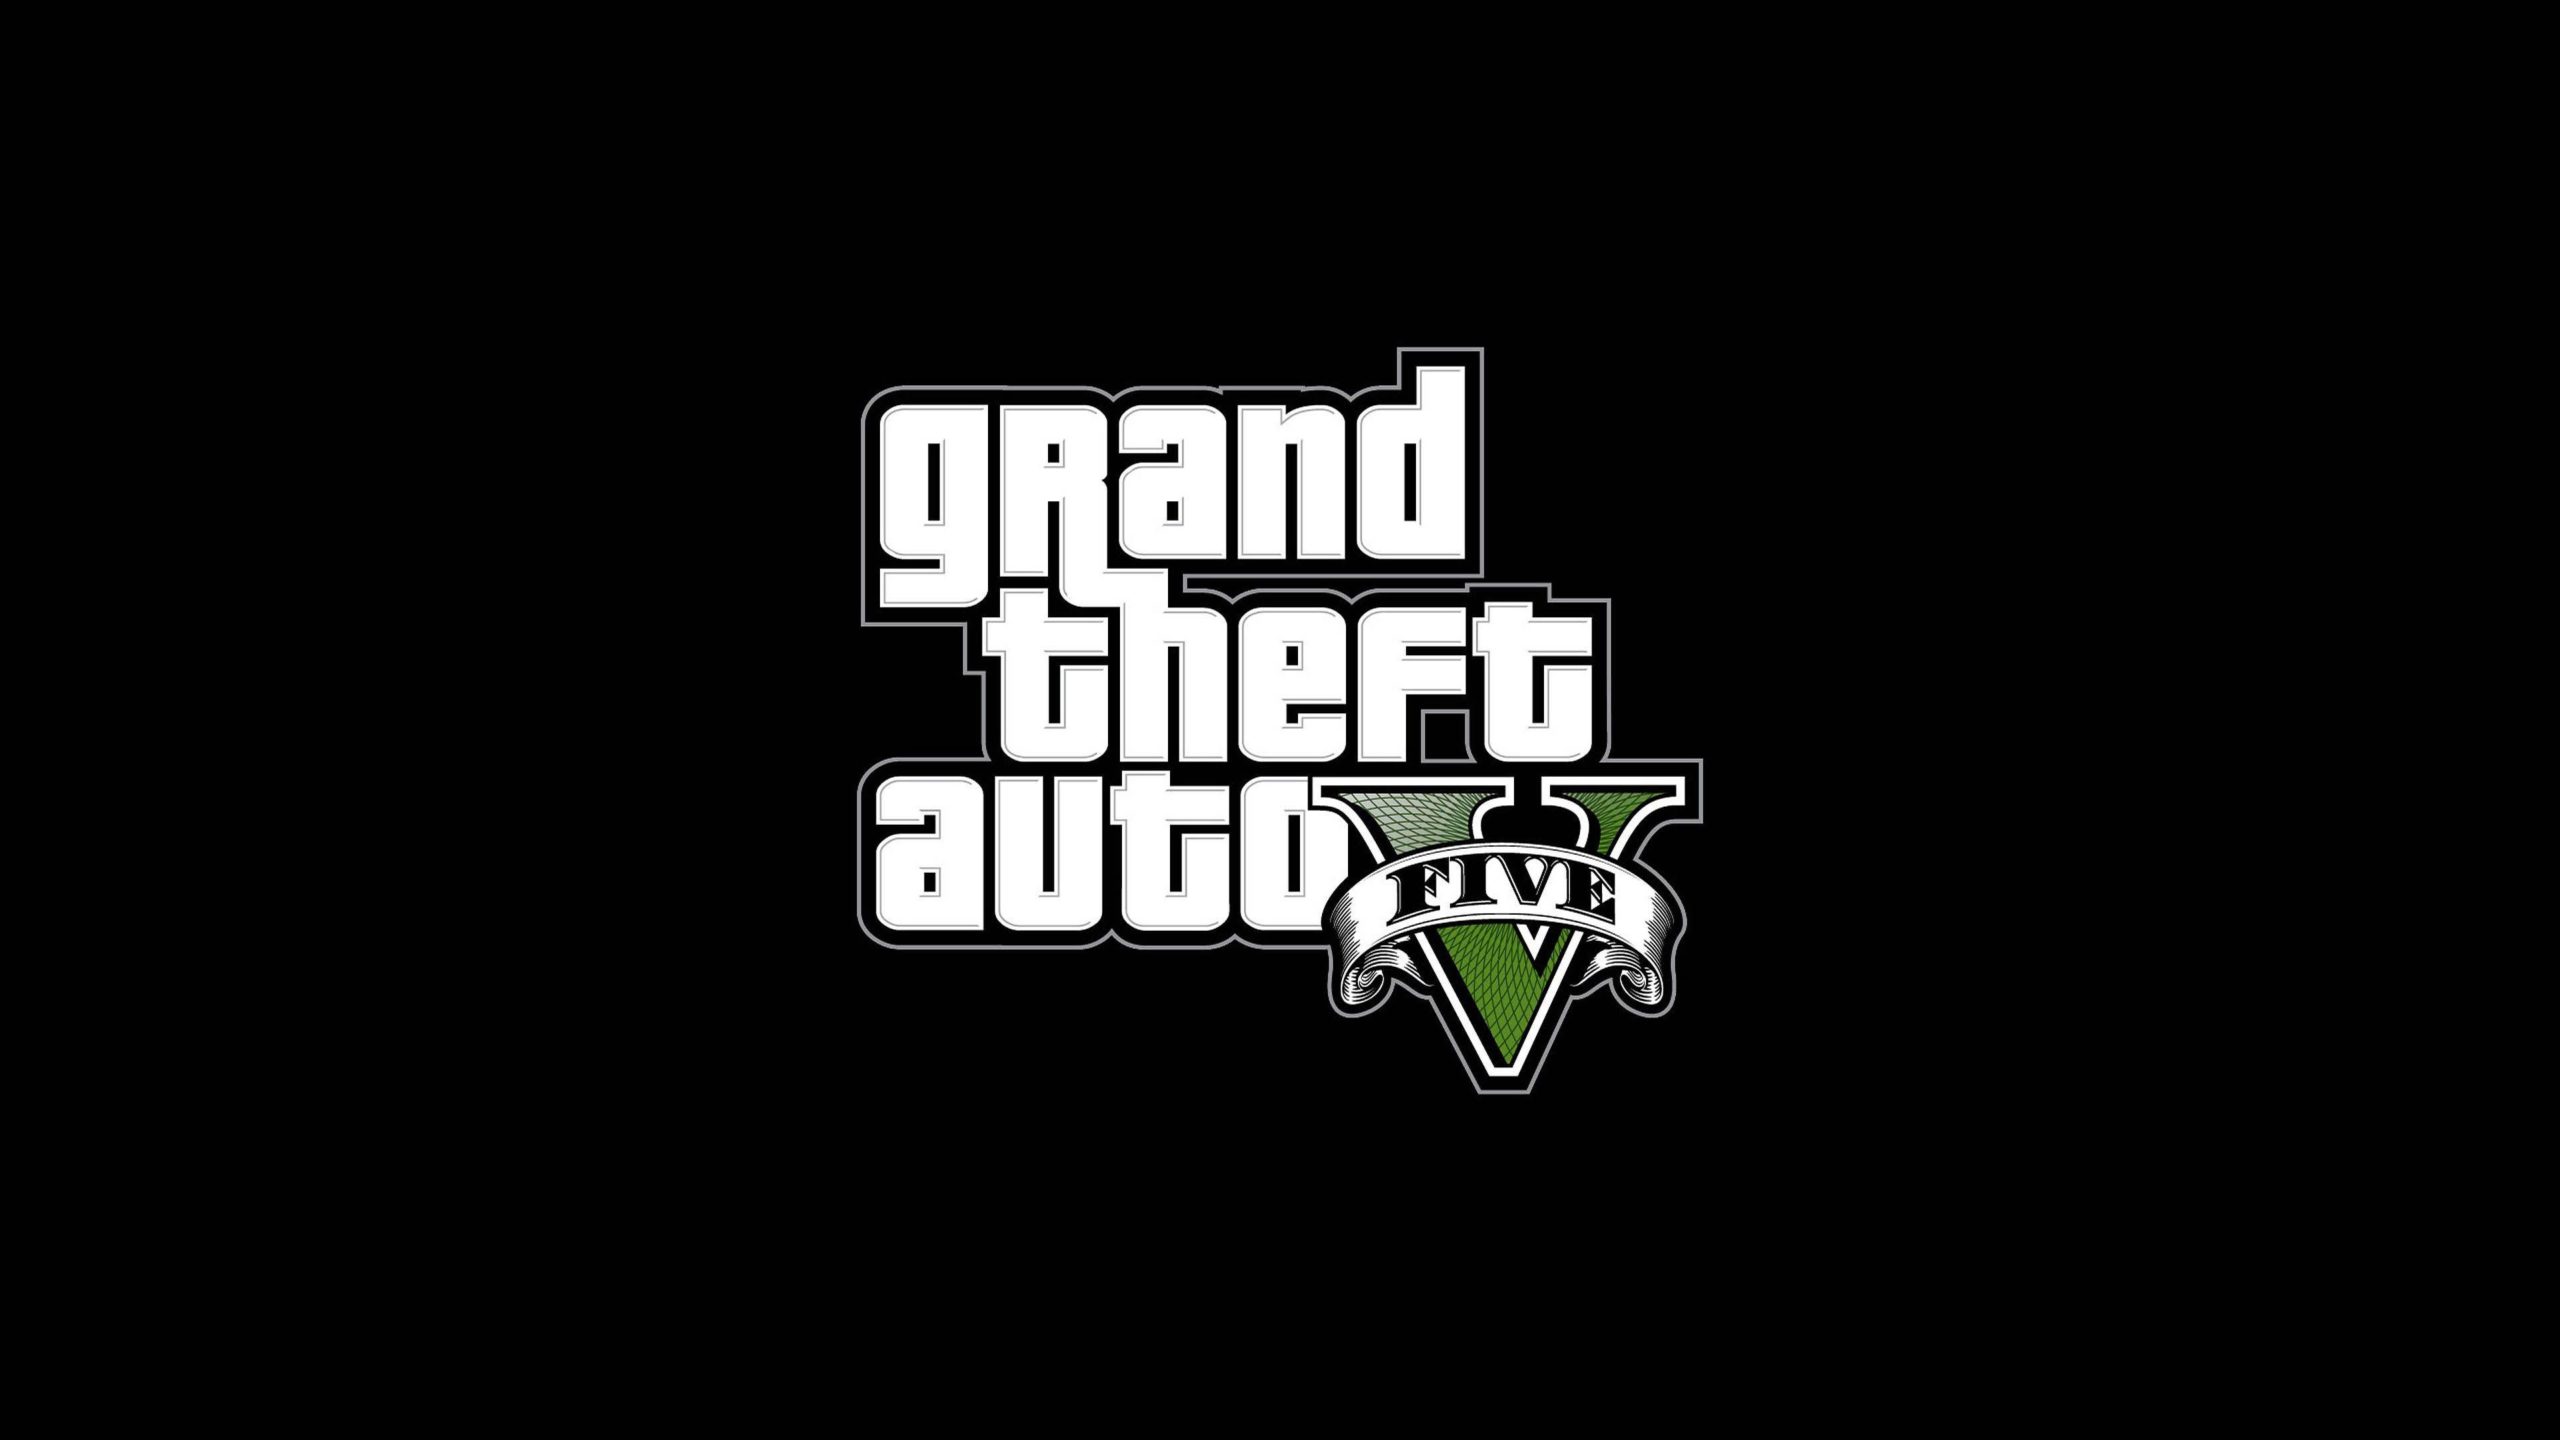 What is the gta 5 theme song фото 56